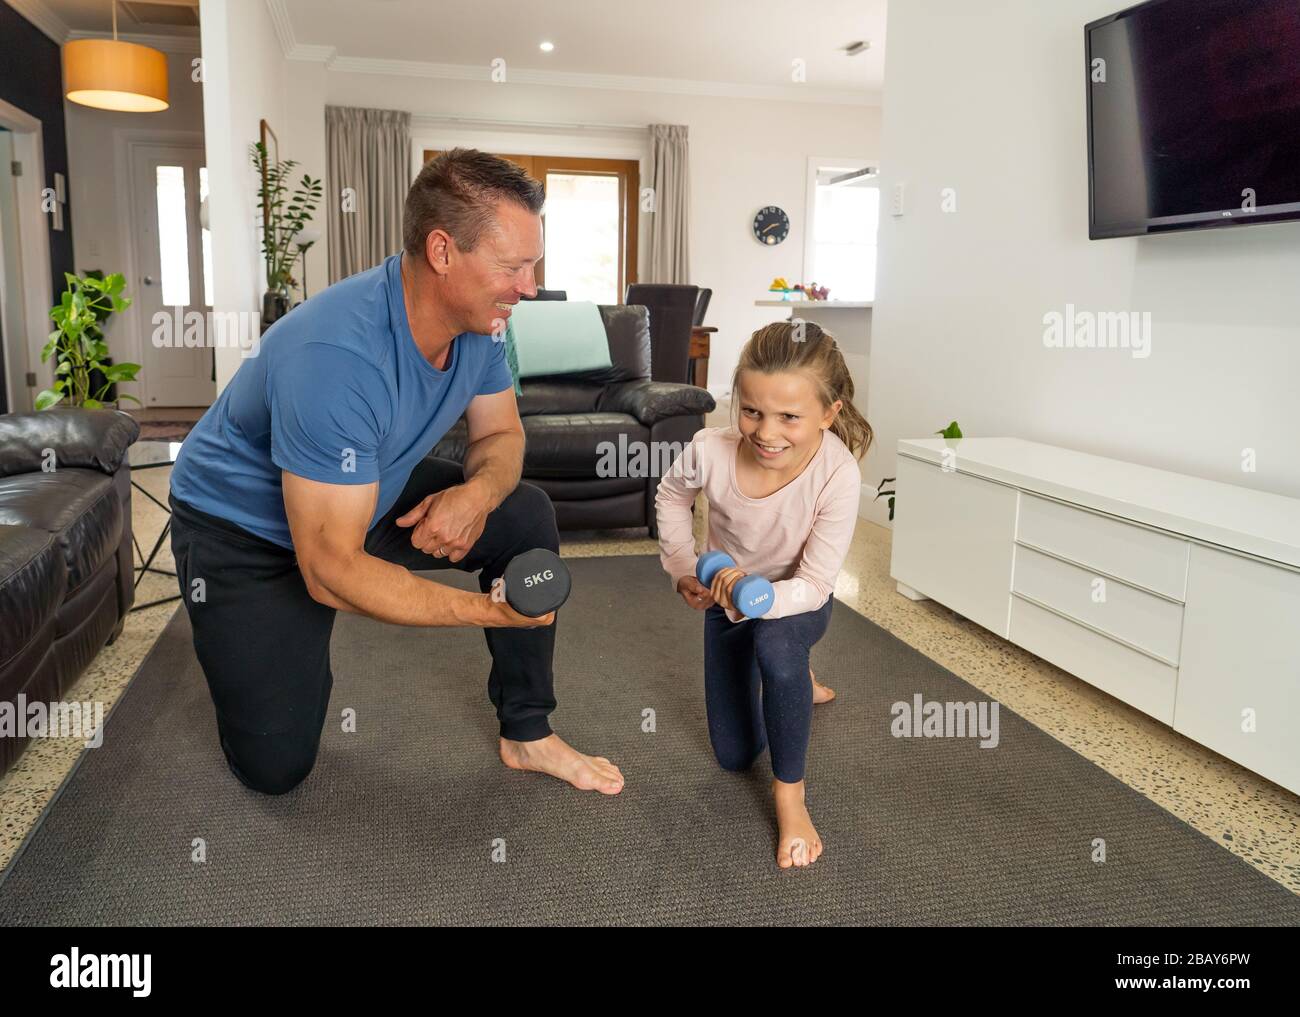 COVID-19 shutdown. Father and daughter in quarantine exercising together with dumbbells. Benefits of physical activity during lockdown. Stay at home, Stock Photo